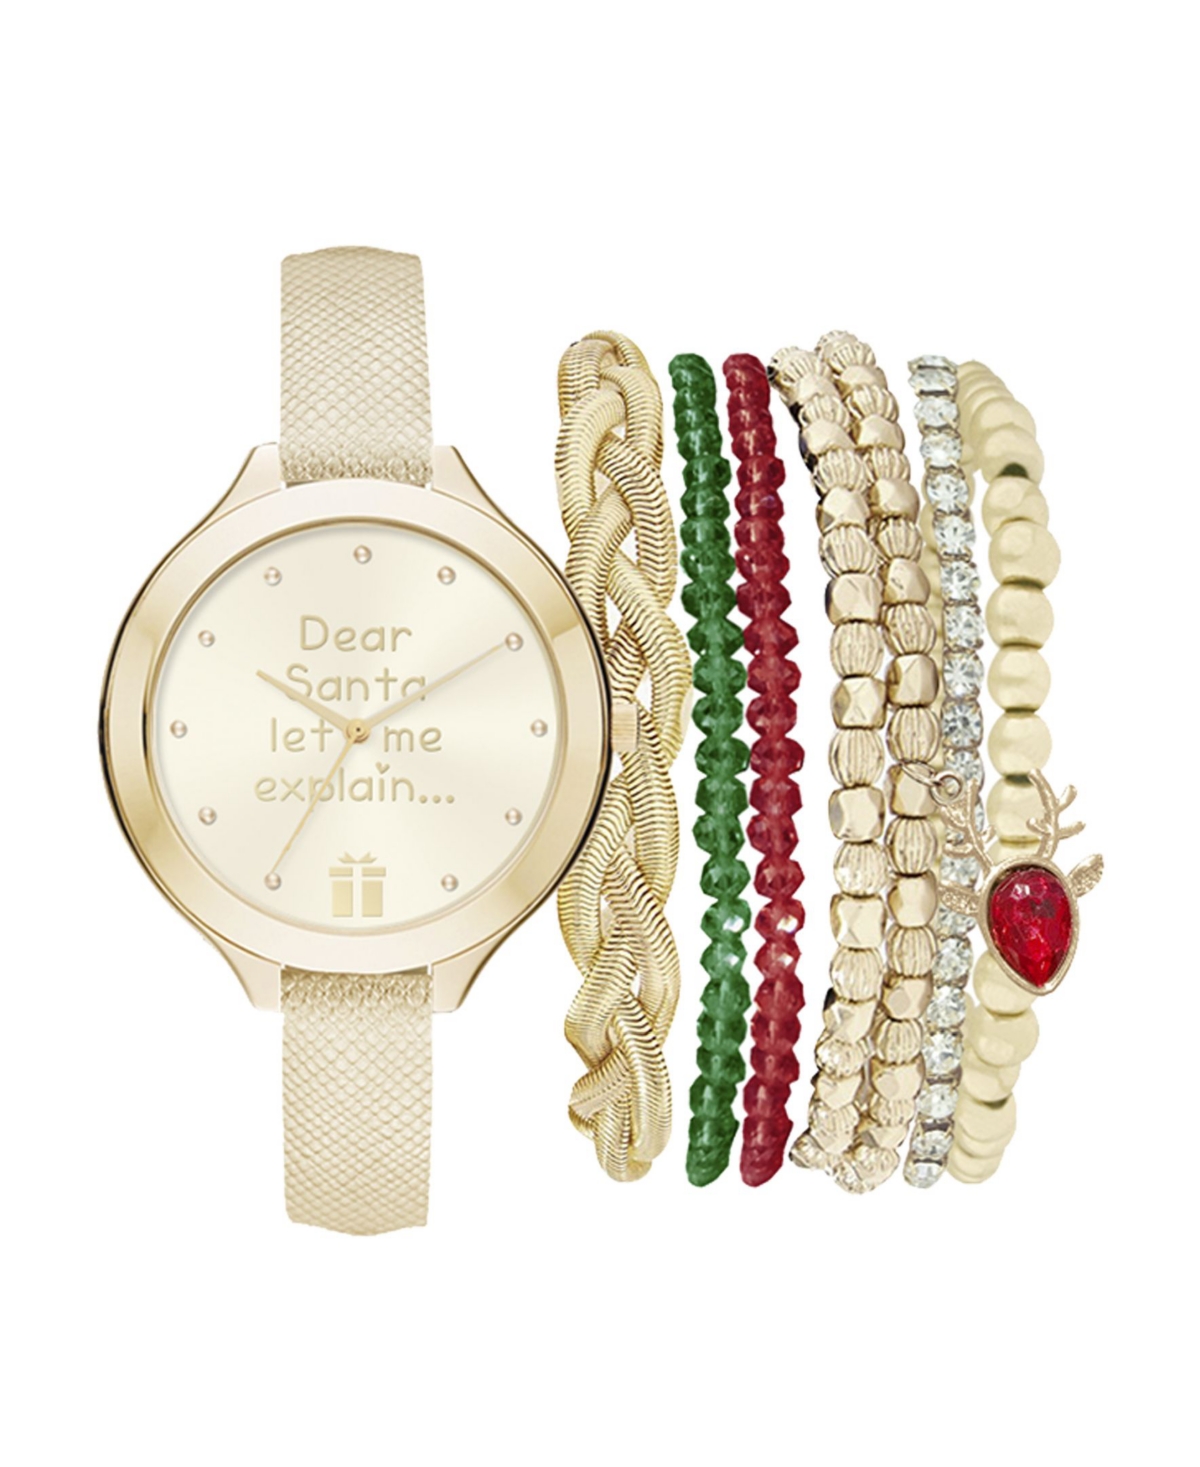 Jessica Carlyle Women's Analog Dear Santa Strap Watch 34mm with Red, Green and Gold-Tone Bracelets Set